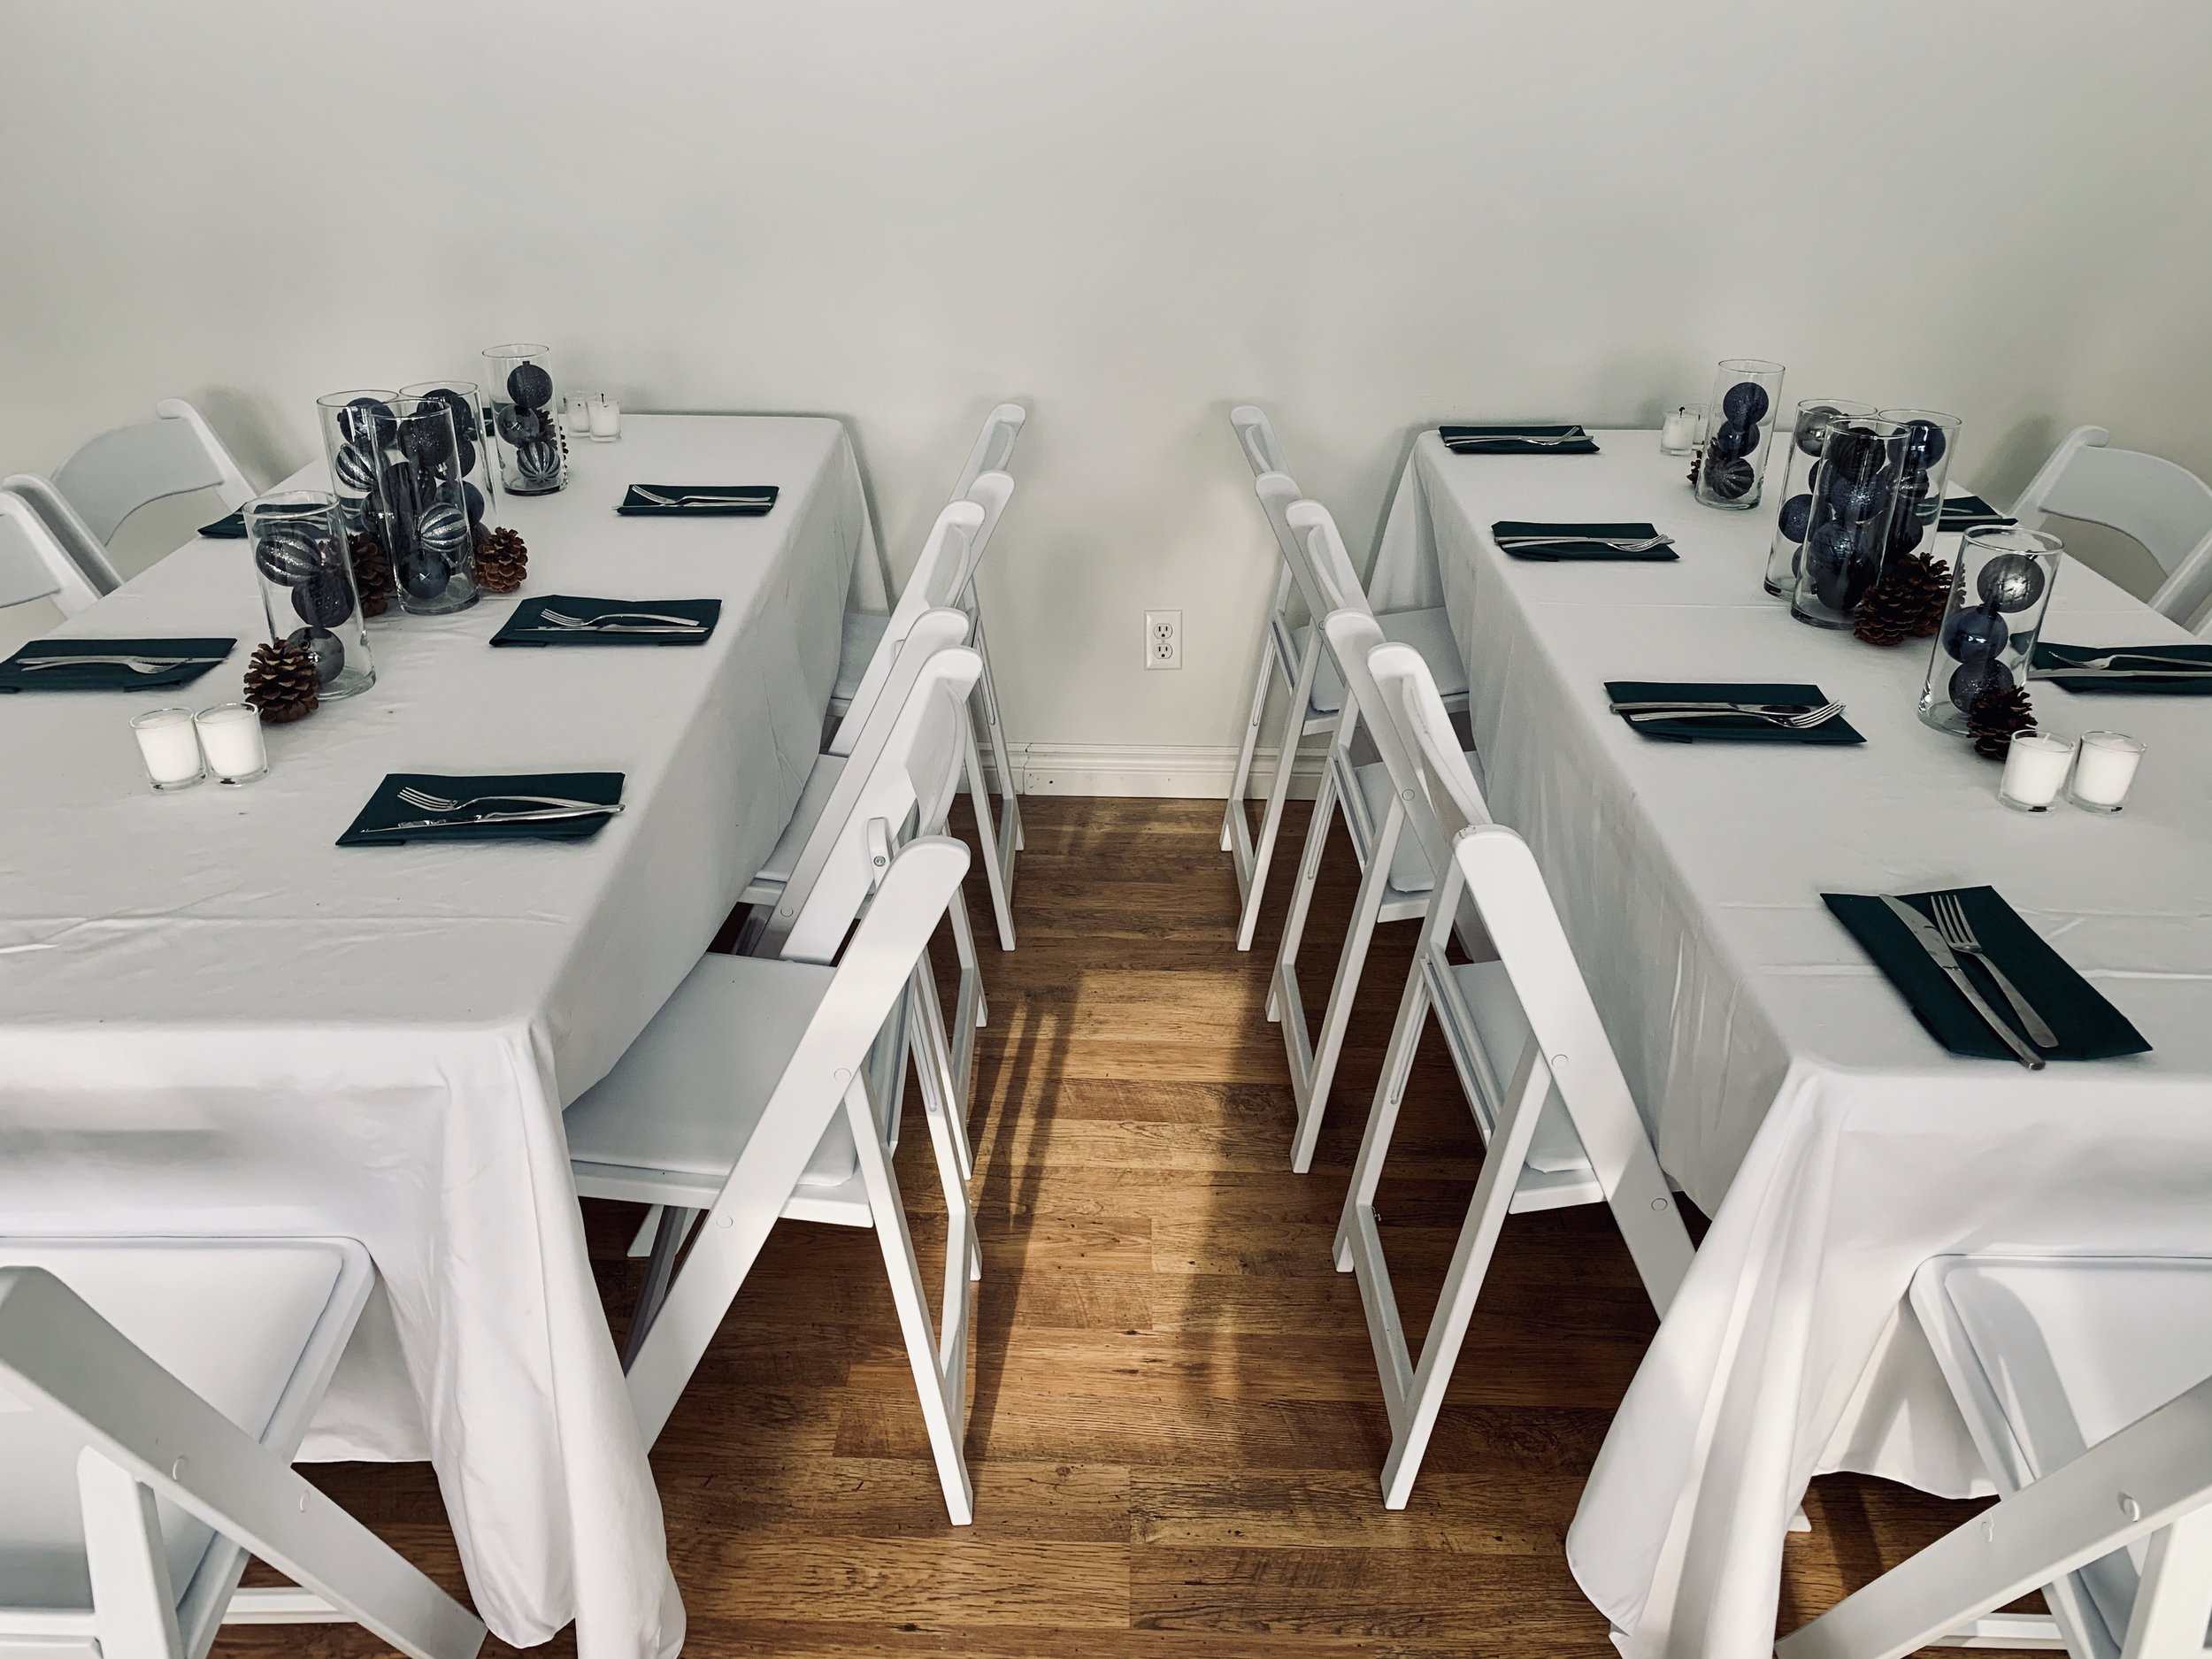 72" Rectangular Table with White Resin Chairs